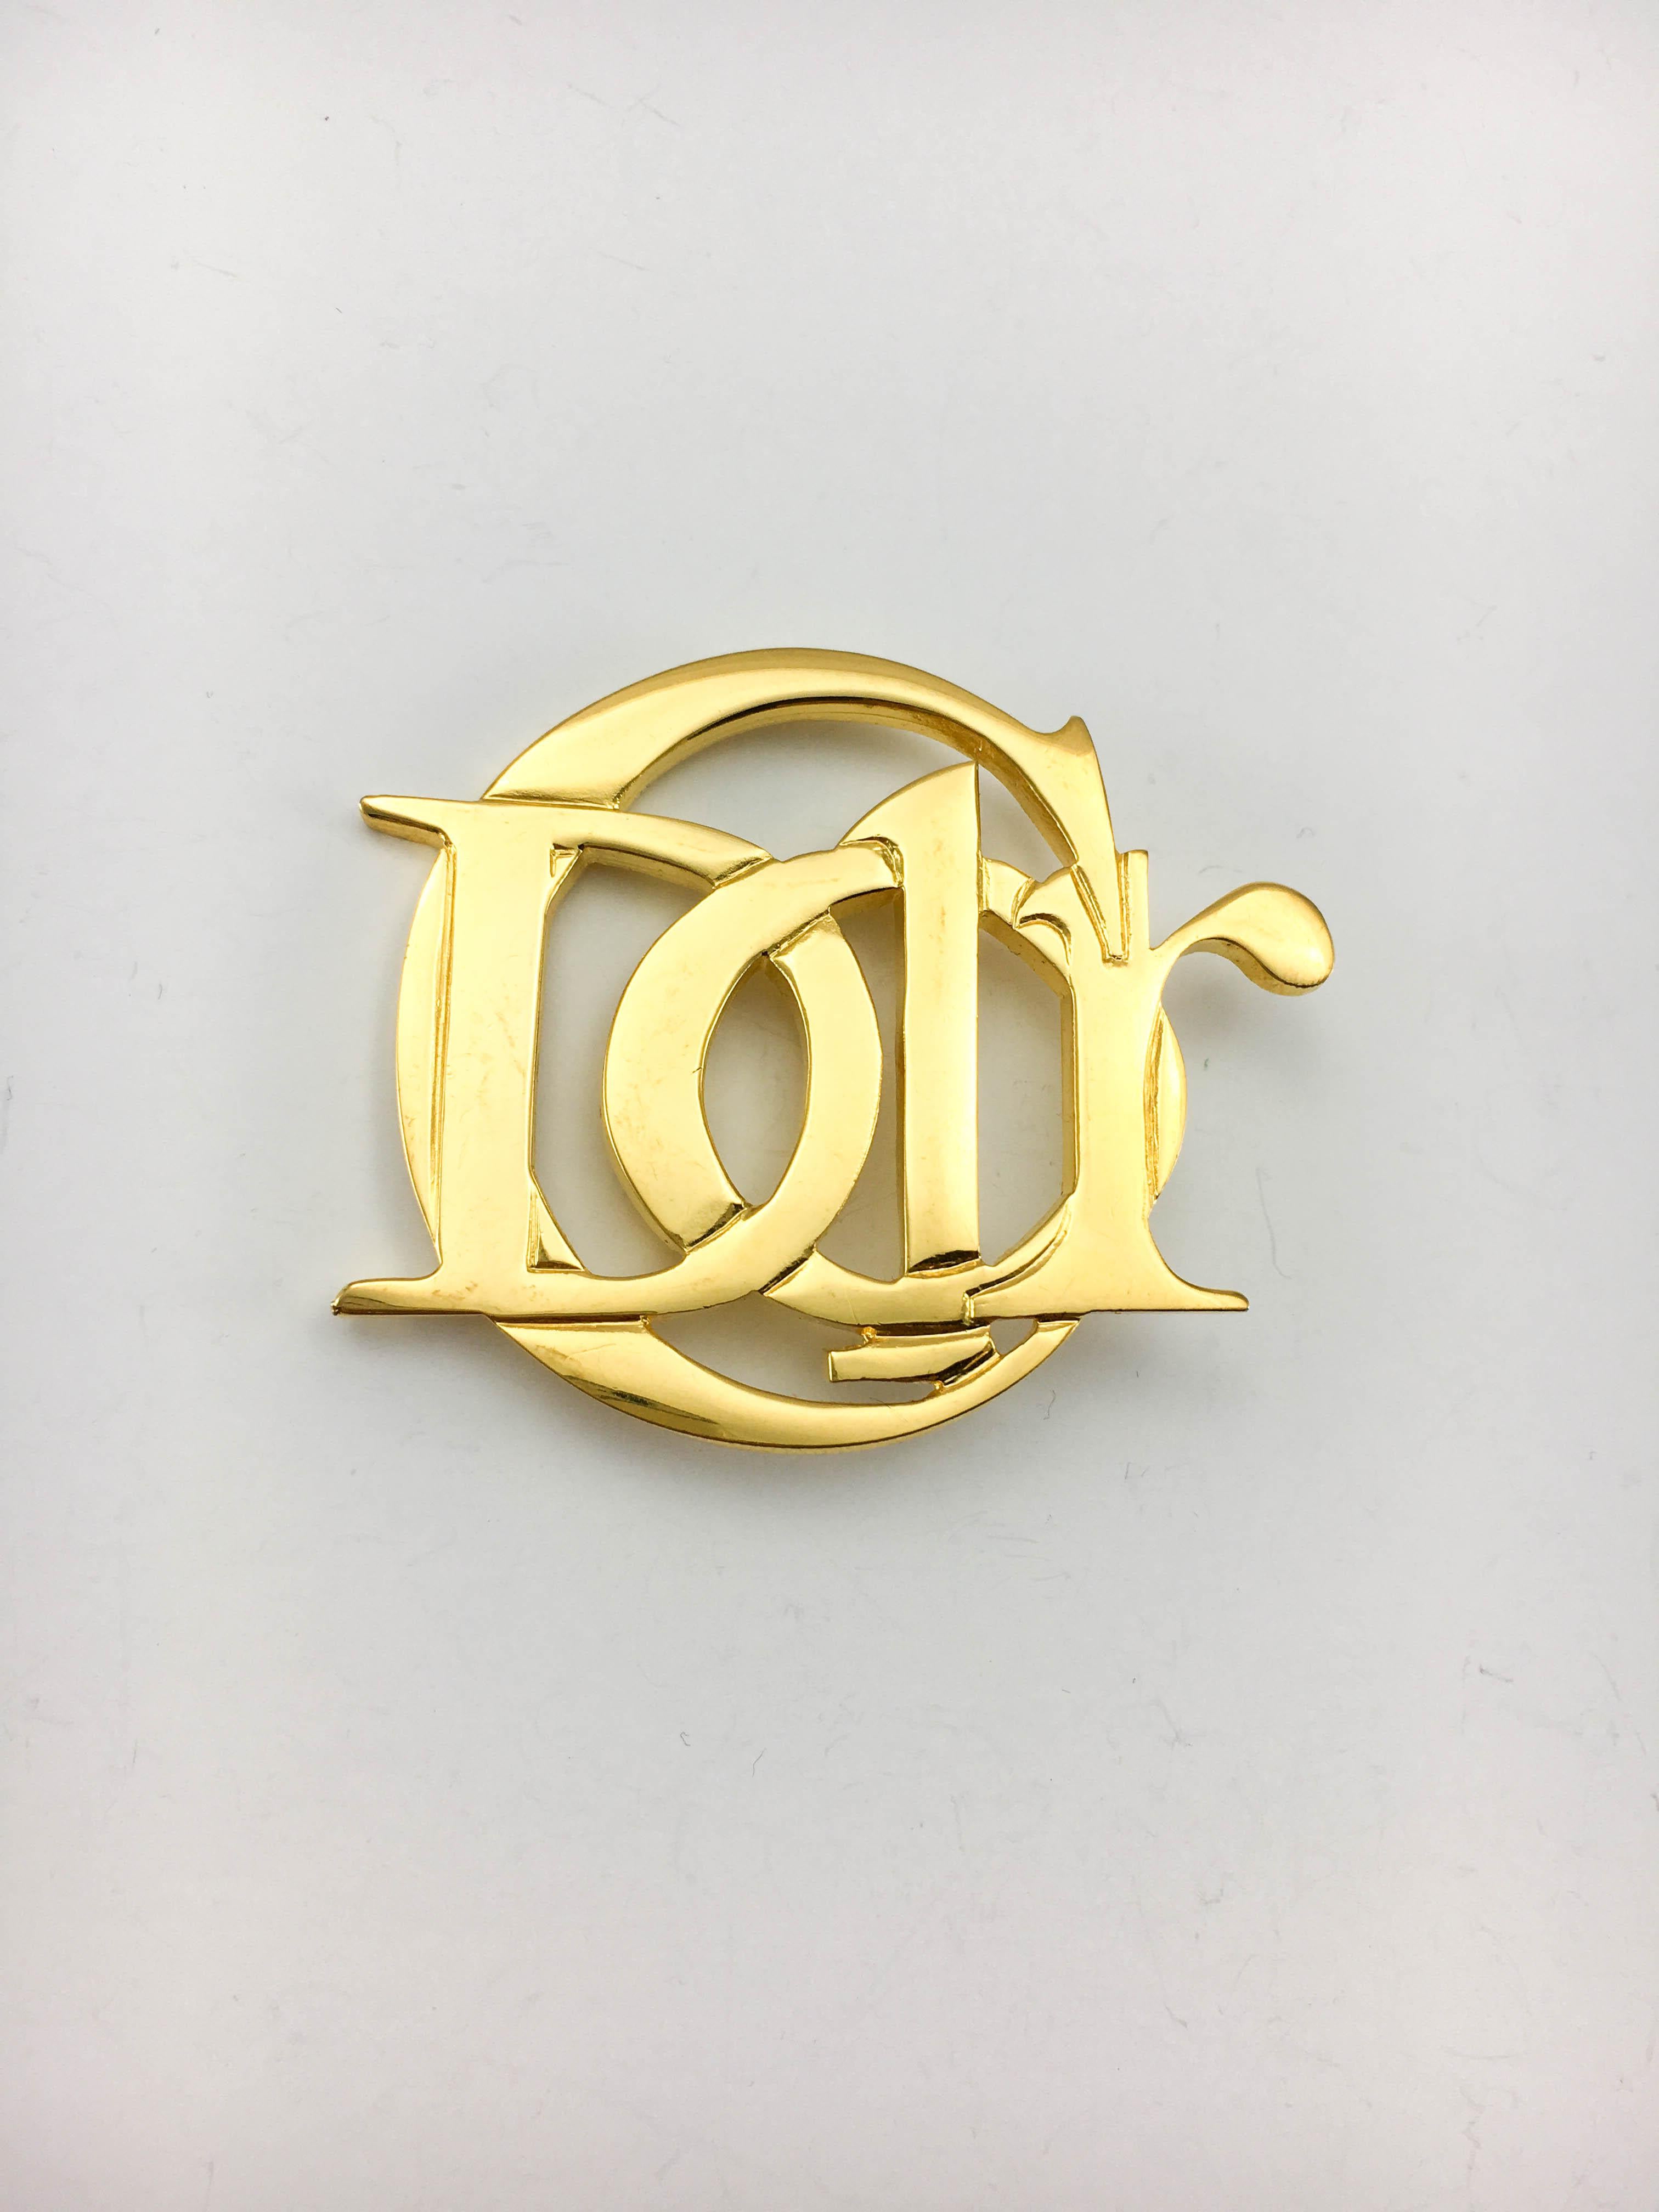 1990's Christian Dior Stylised Gilt Logo Brooch In Excellent Condition For Sale In London, Chelsea